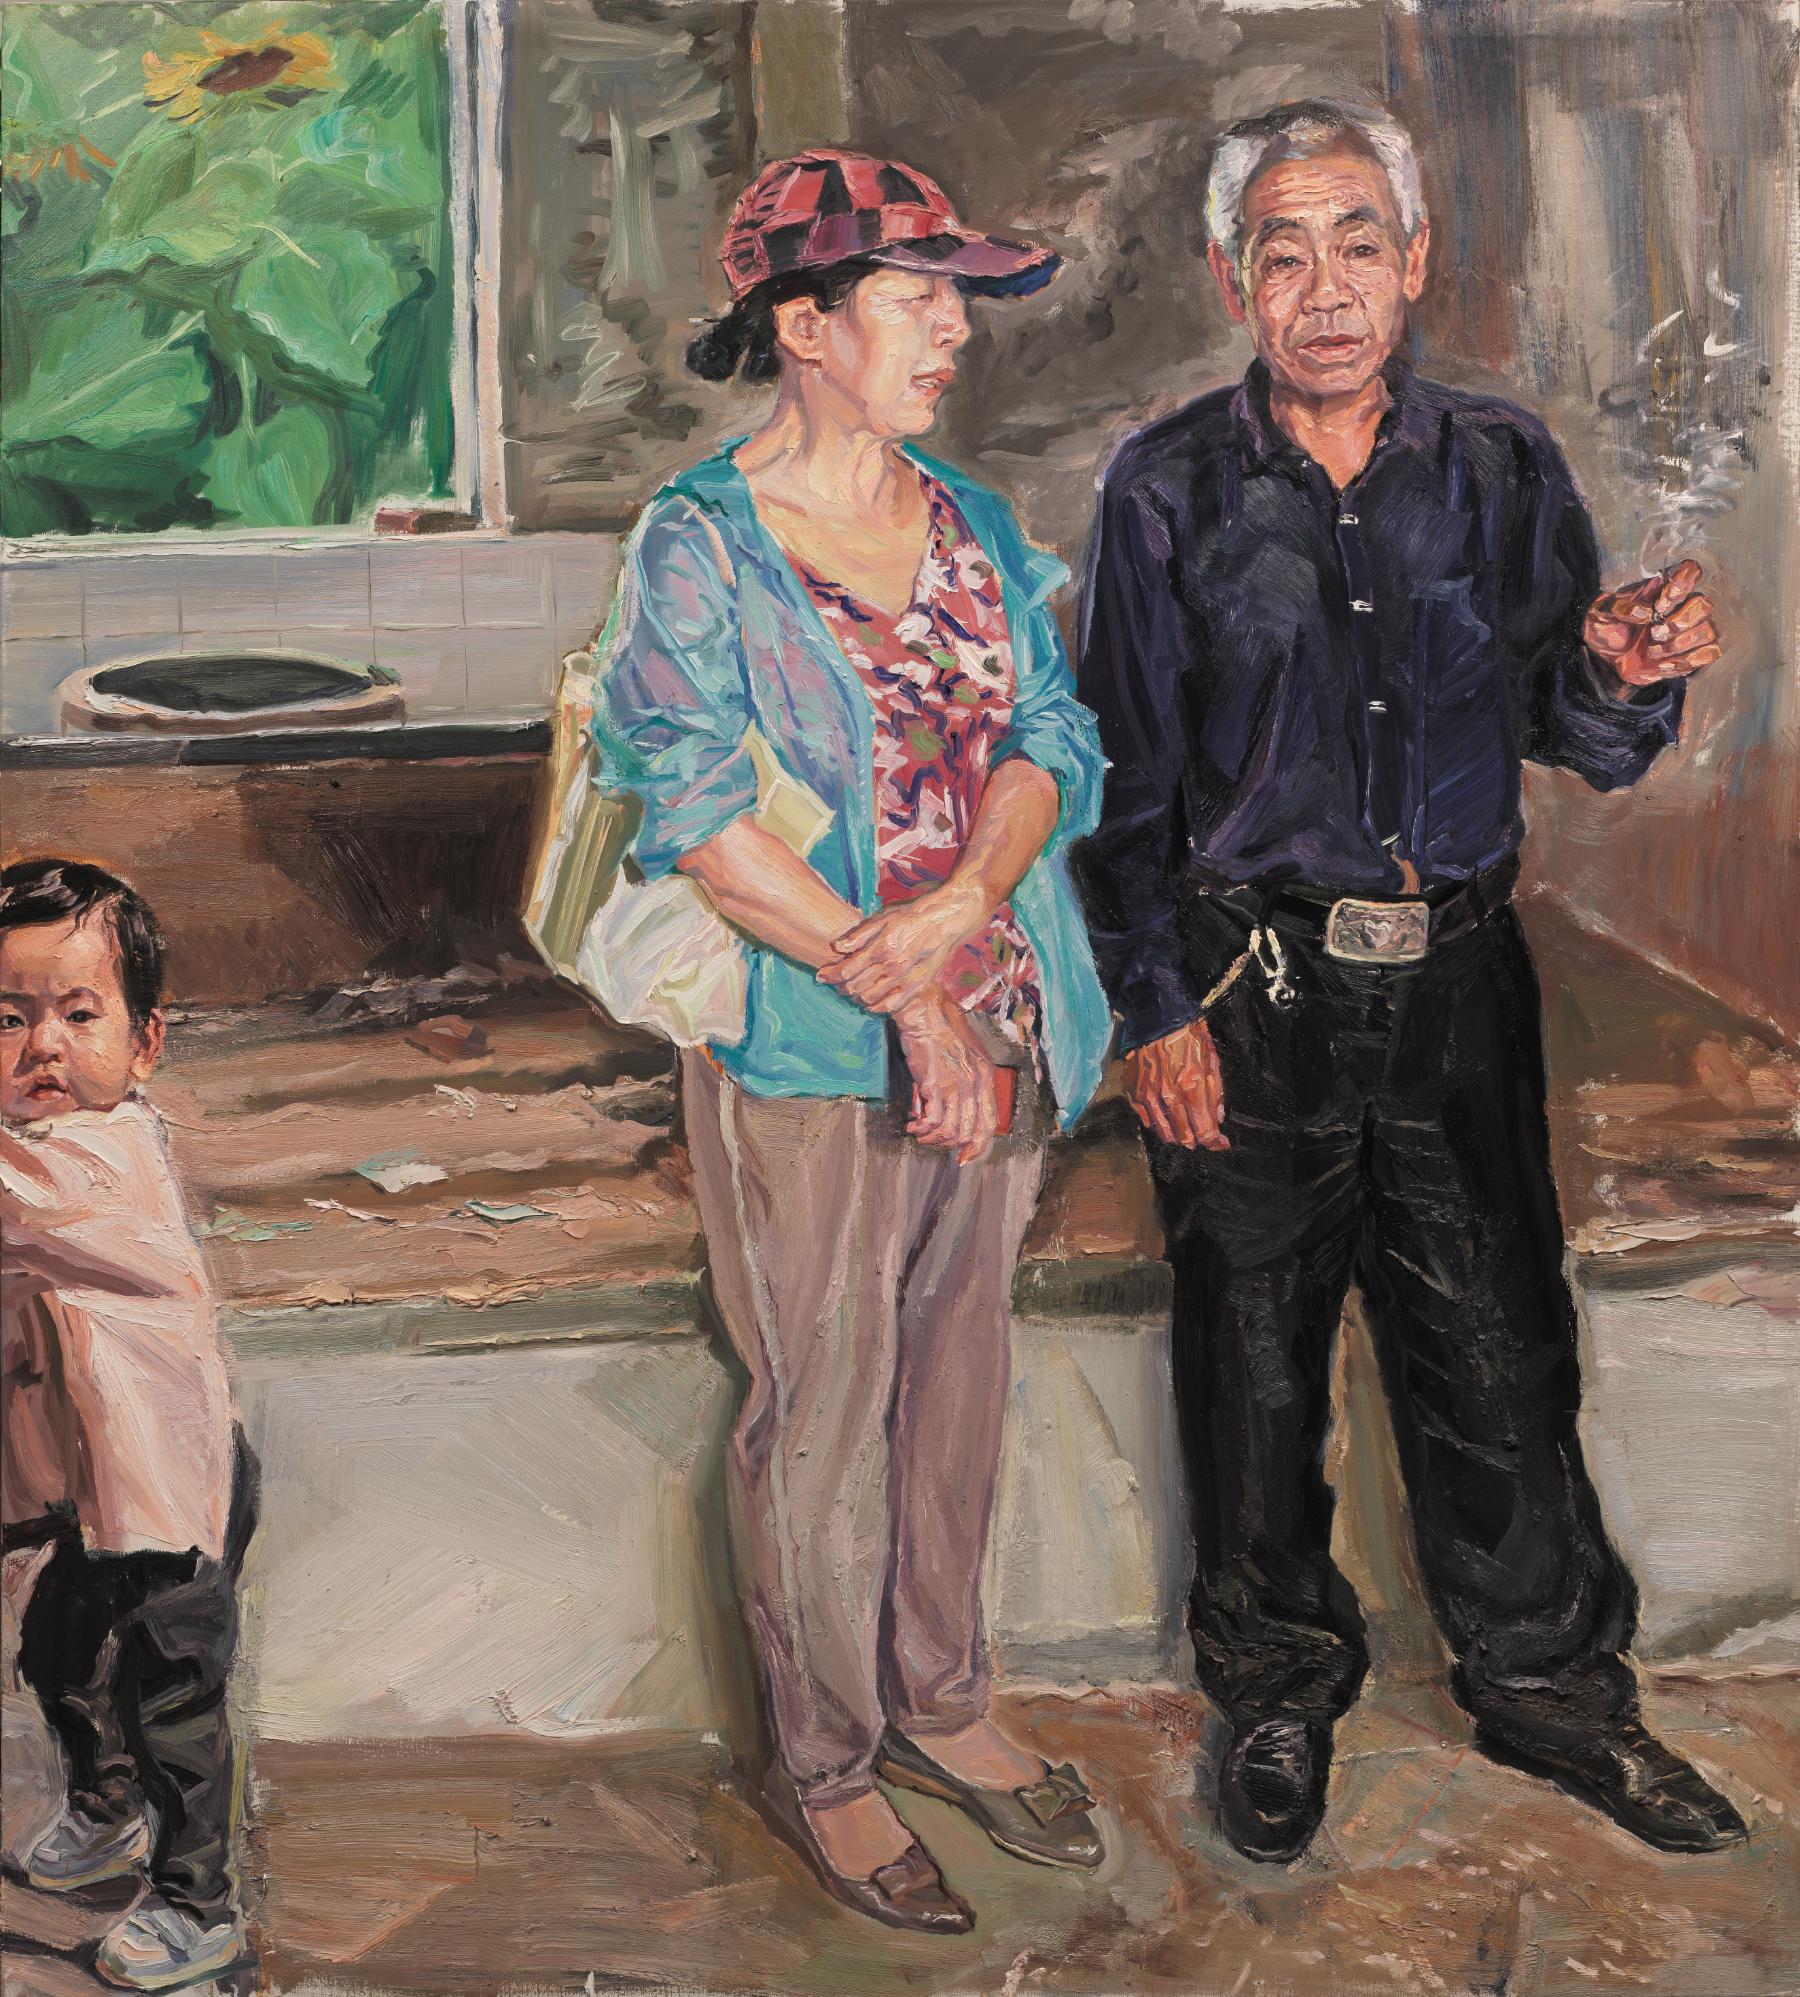 This painting bellows to the serie "We are Sejourners".
Total dimension of the serie: 200 x 1100 cm
Total price of the serie: 78 000 €

Su Yu is a Chinese artist born in 1987 who lives & works in Beijing in China. He was an old student of